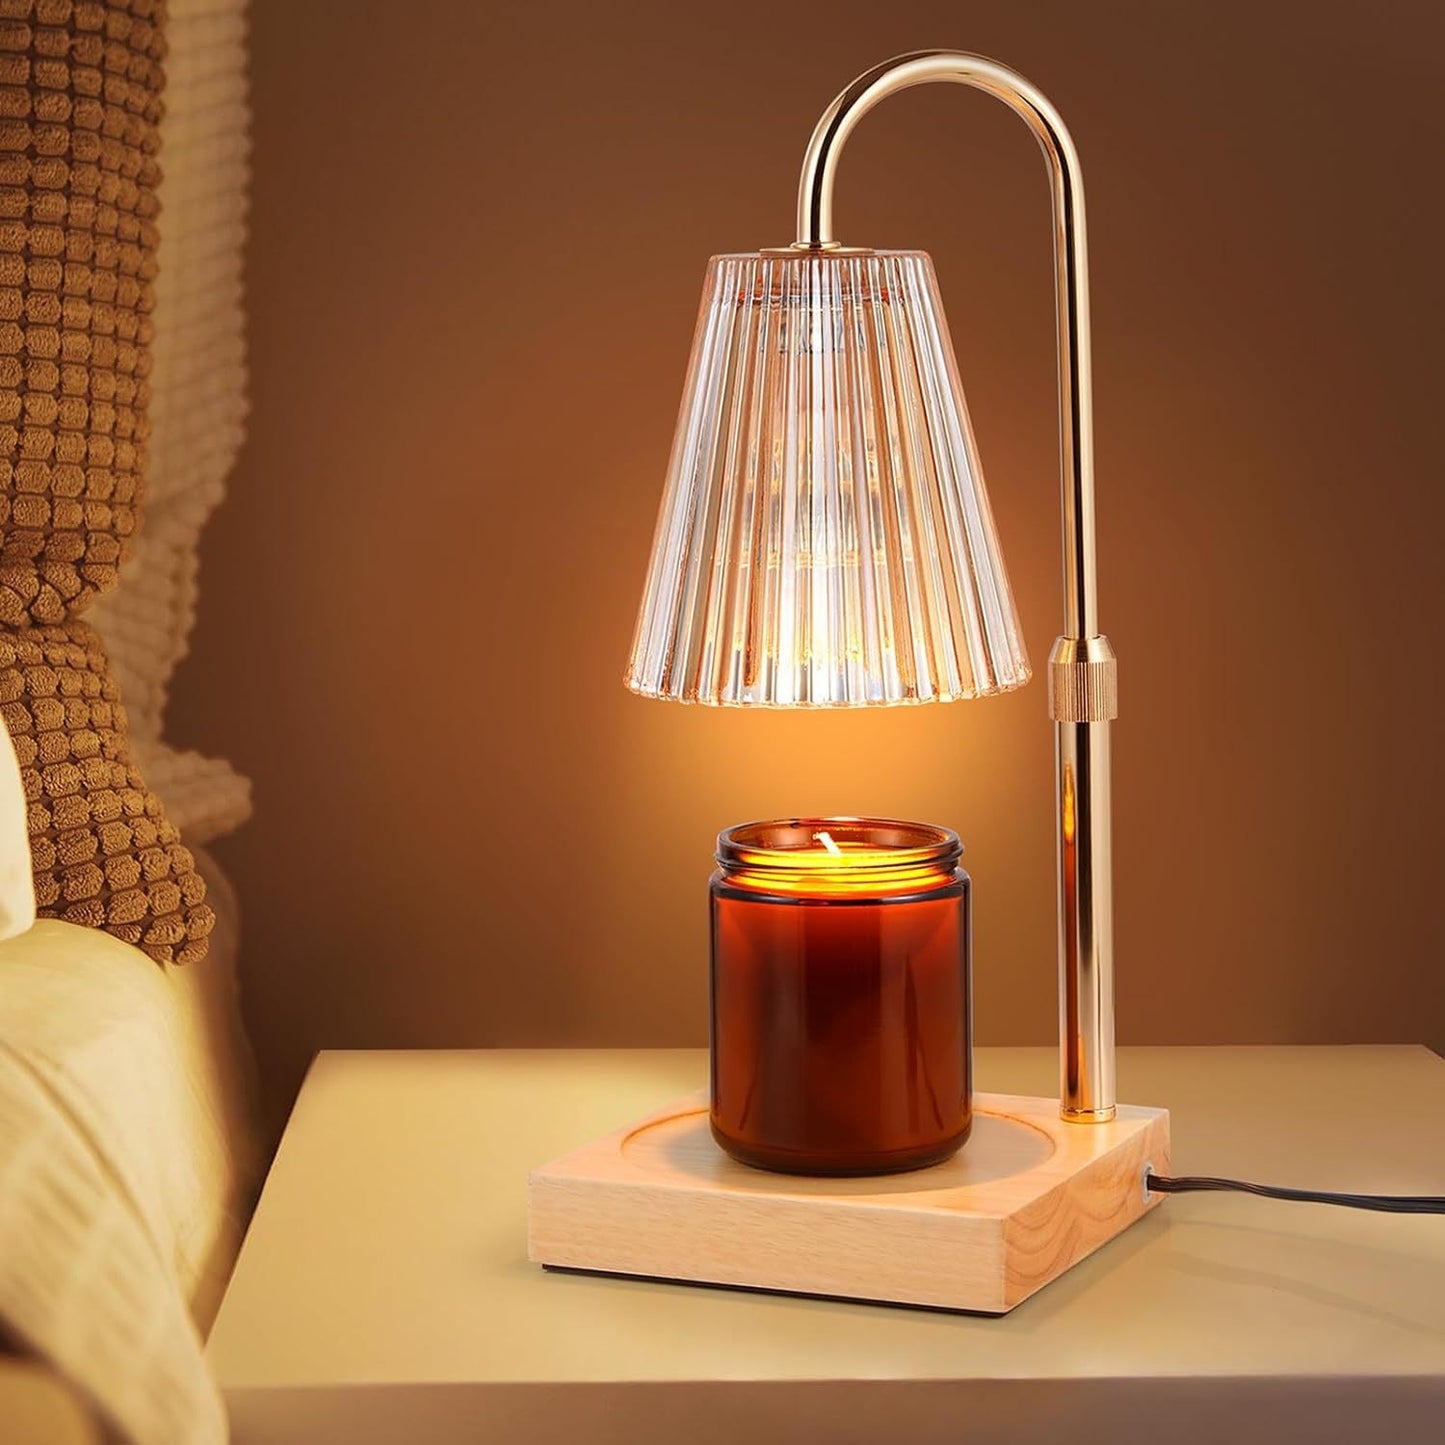 New adjustable timed wax melting lamp with dual purpose lighting function, simple and smokeless  aromatherapy  Candle Warmer Lamp